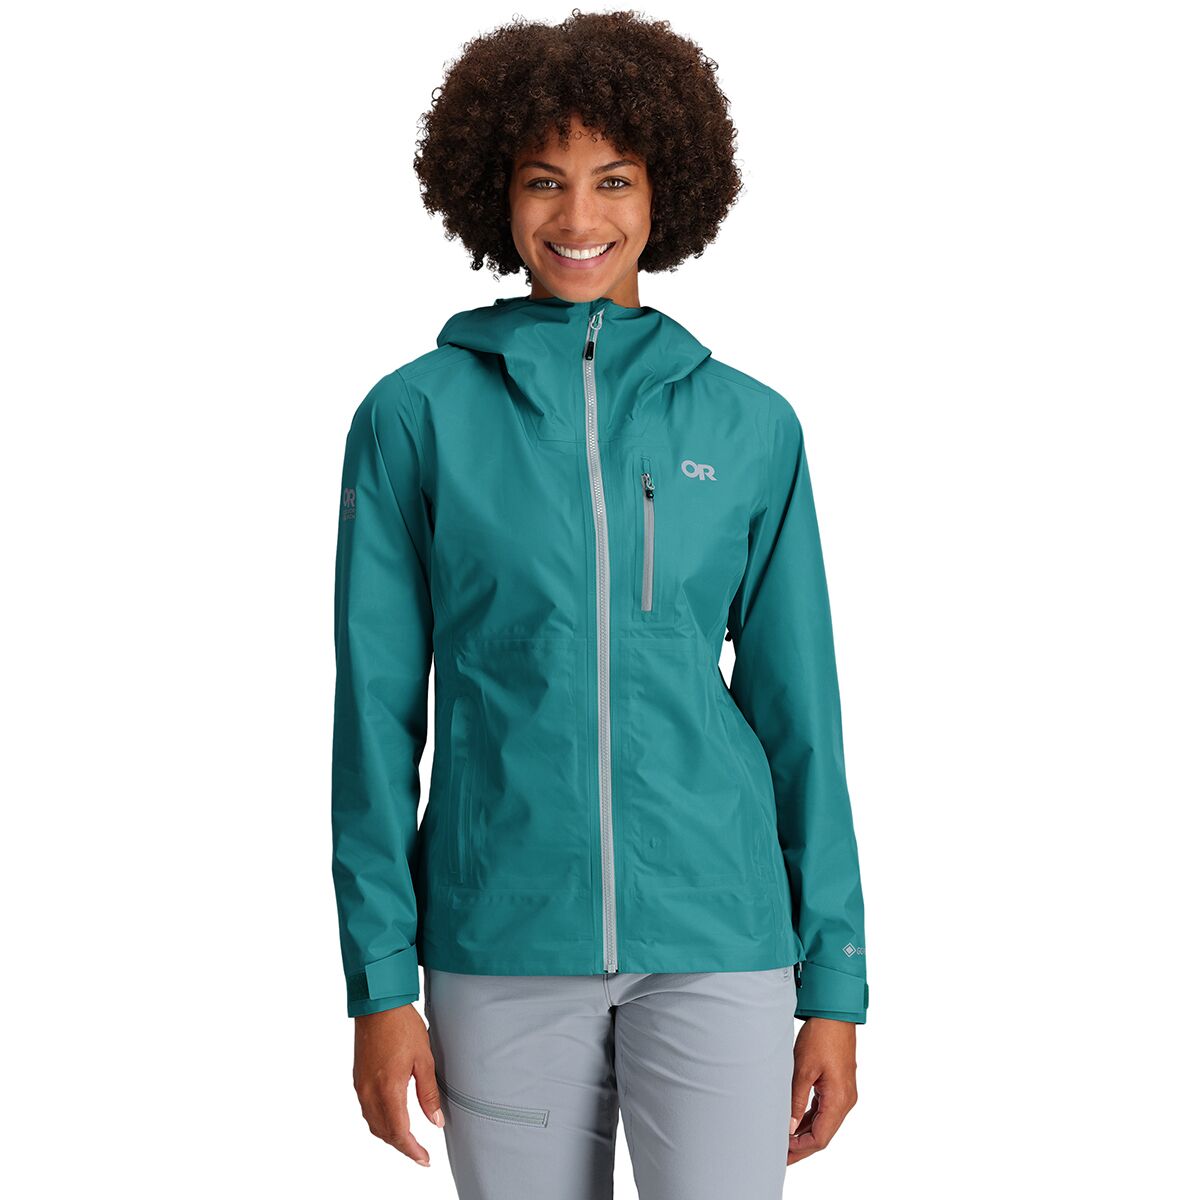 Outdoor Research Aspire Super Stretch Jacket - Women's